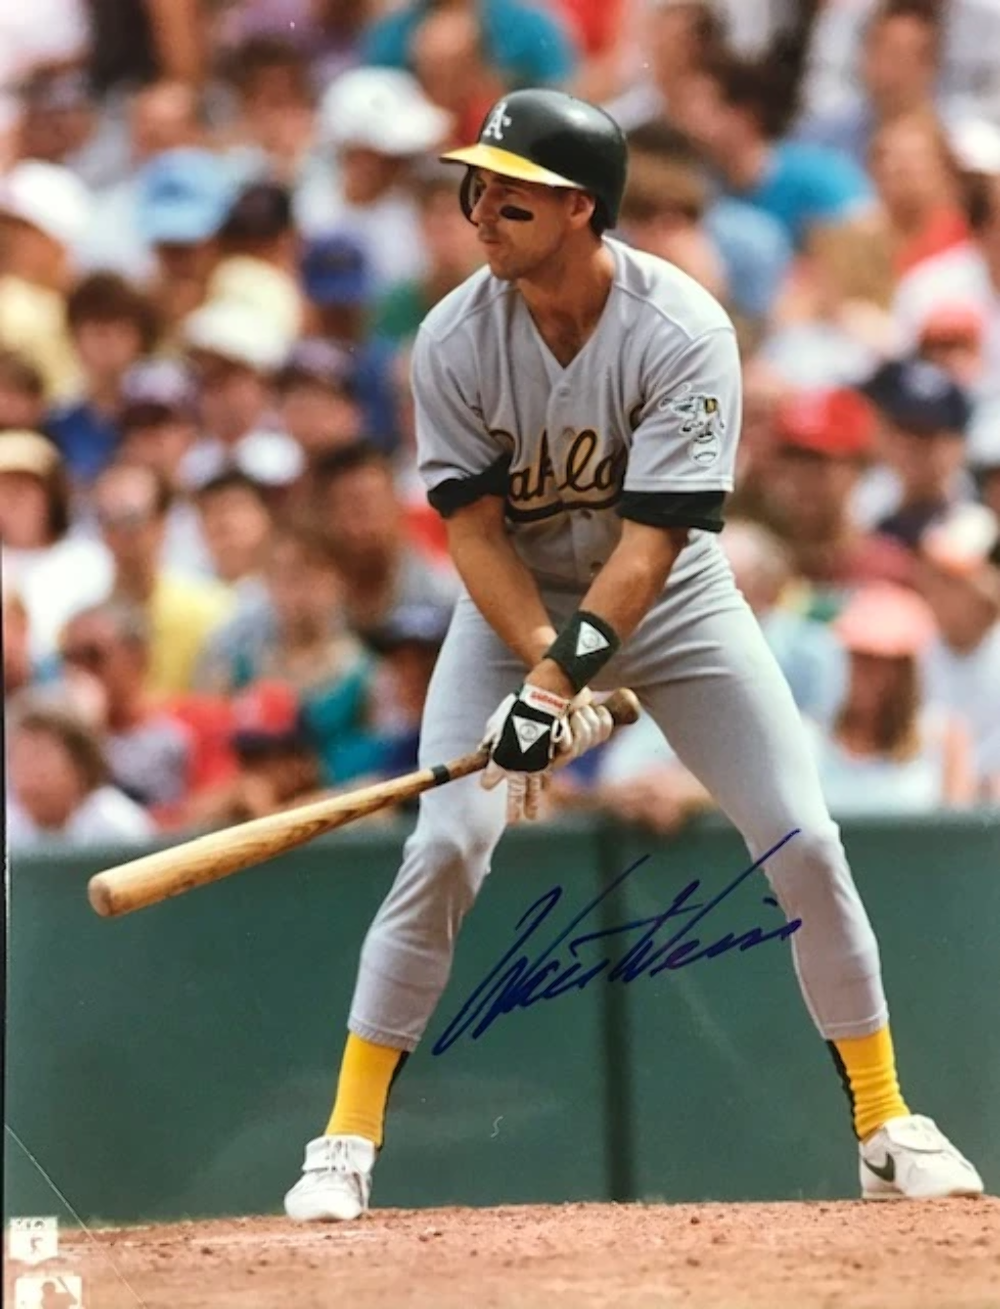 Walt Weiss Autographed Signed 8x10 Photo Poster painting ( Athletics ) REPRINT